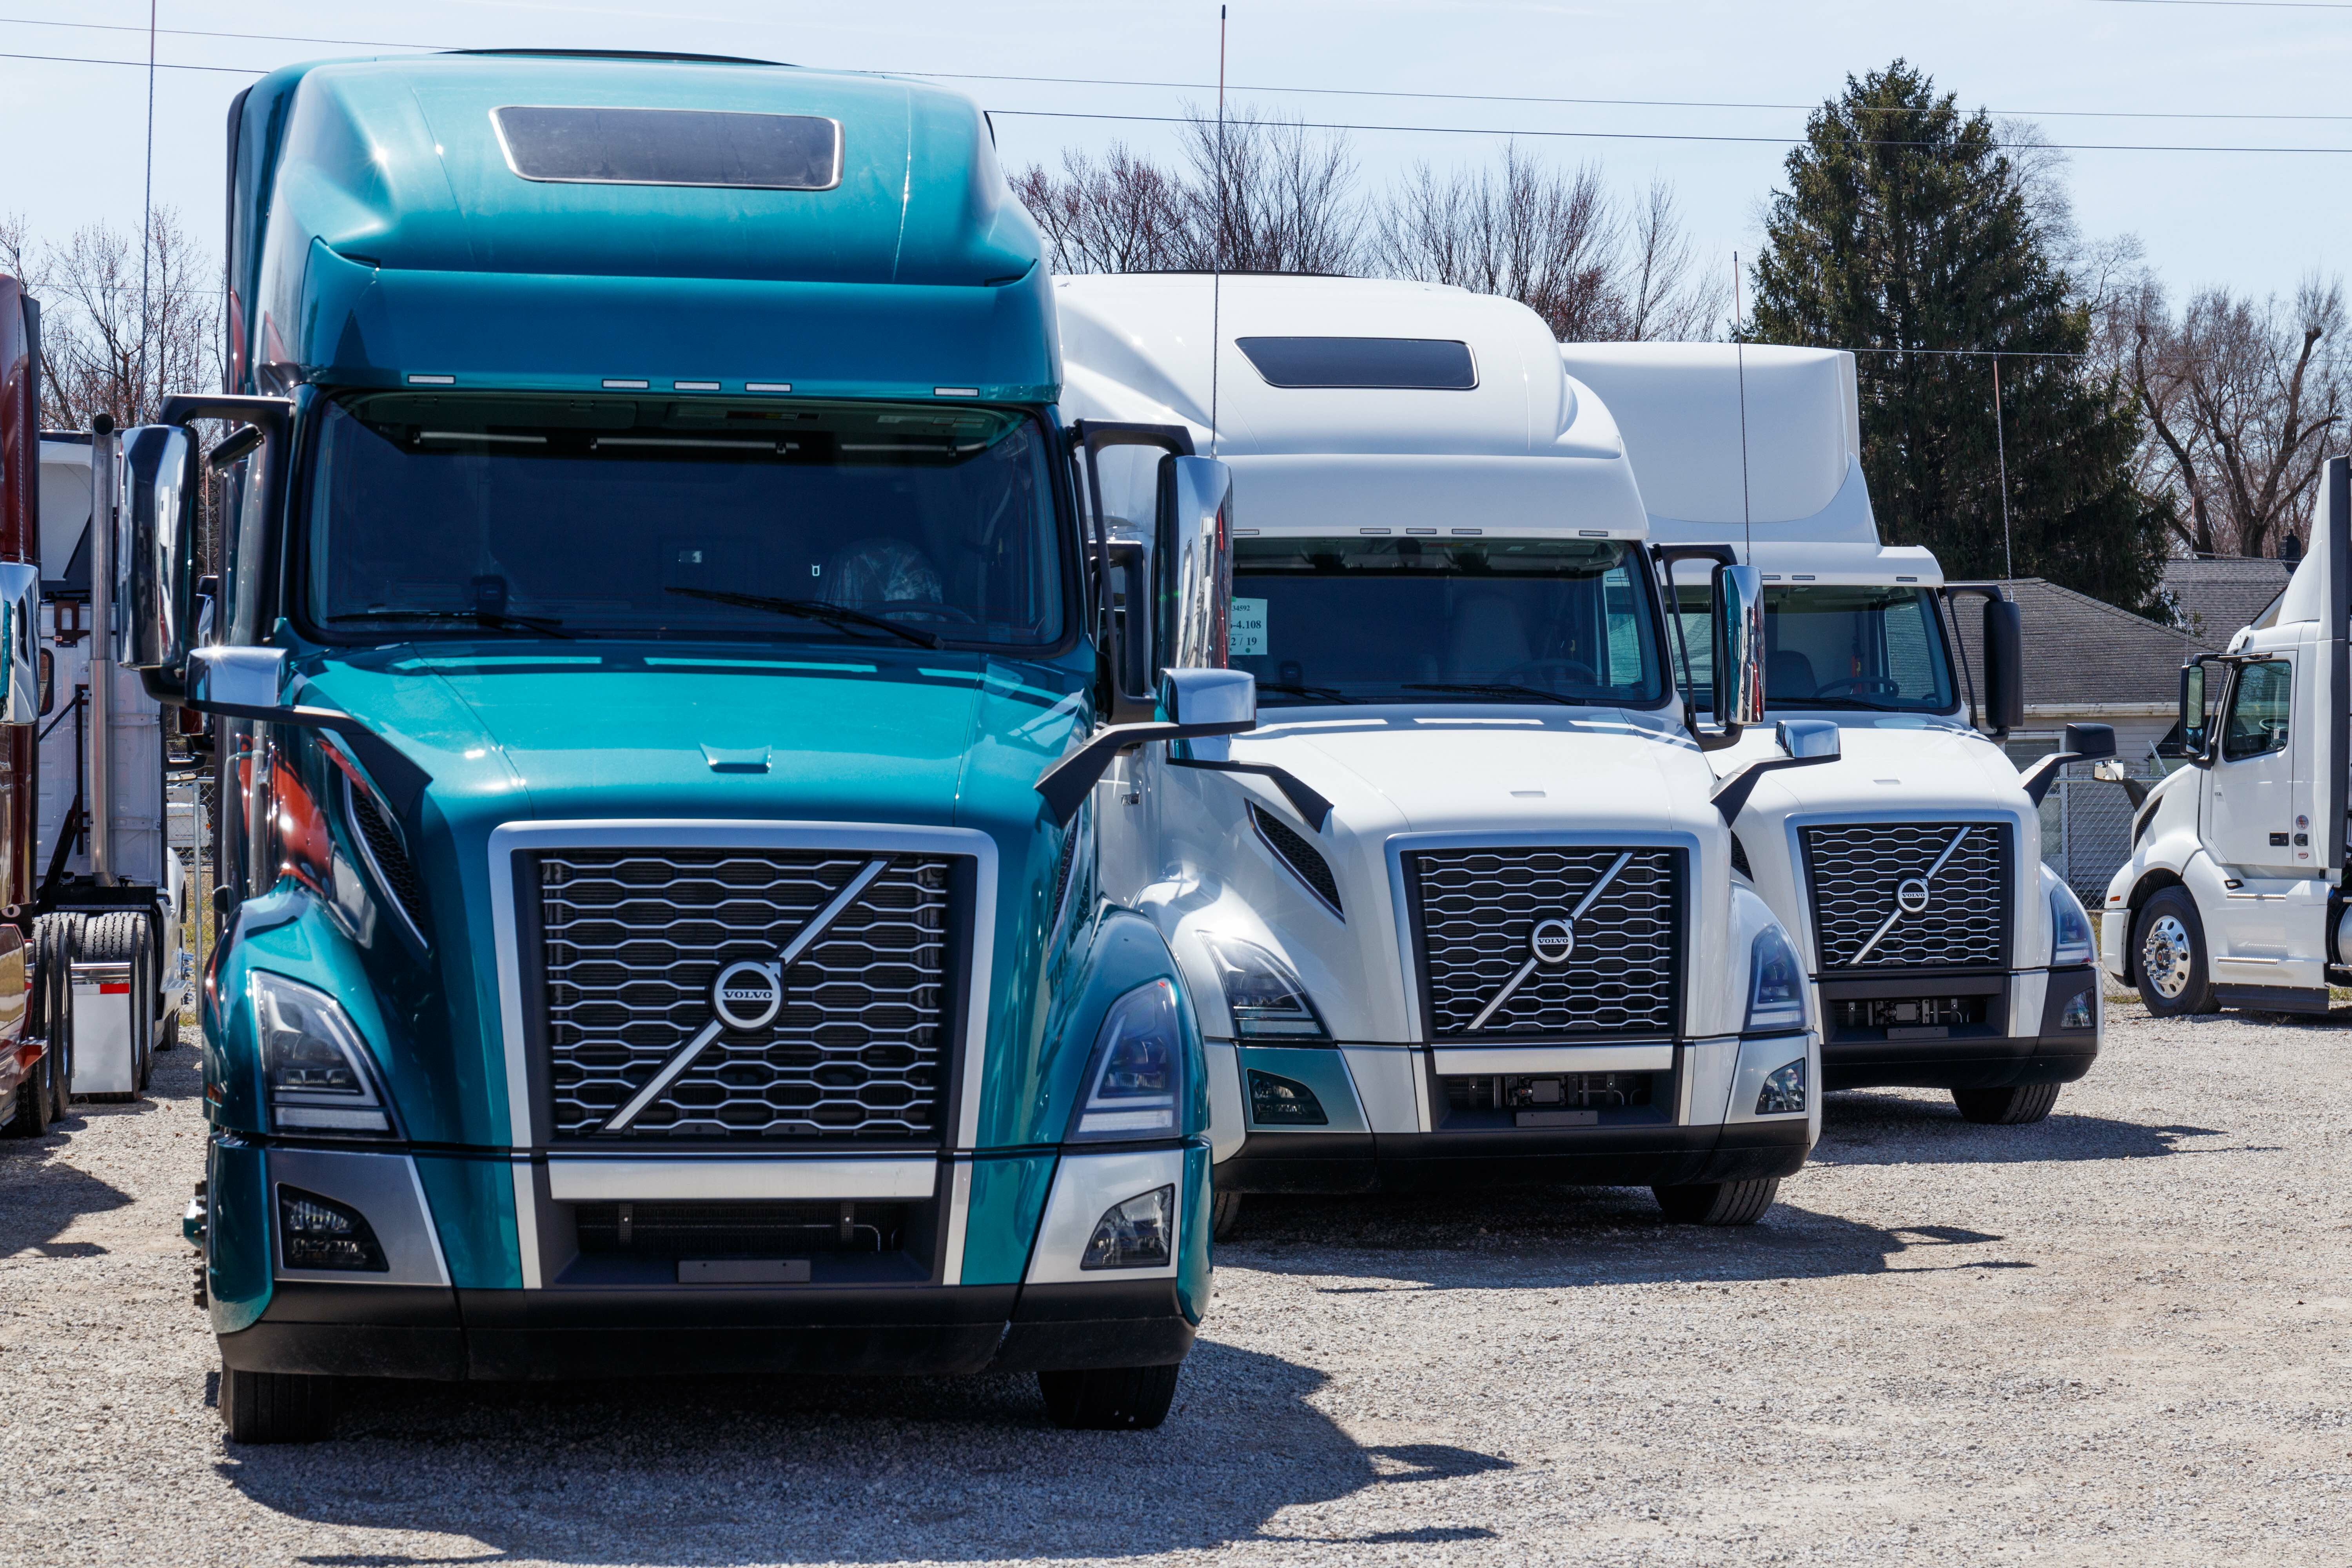 What to expect at the 2019 Work Truck Show